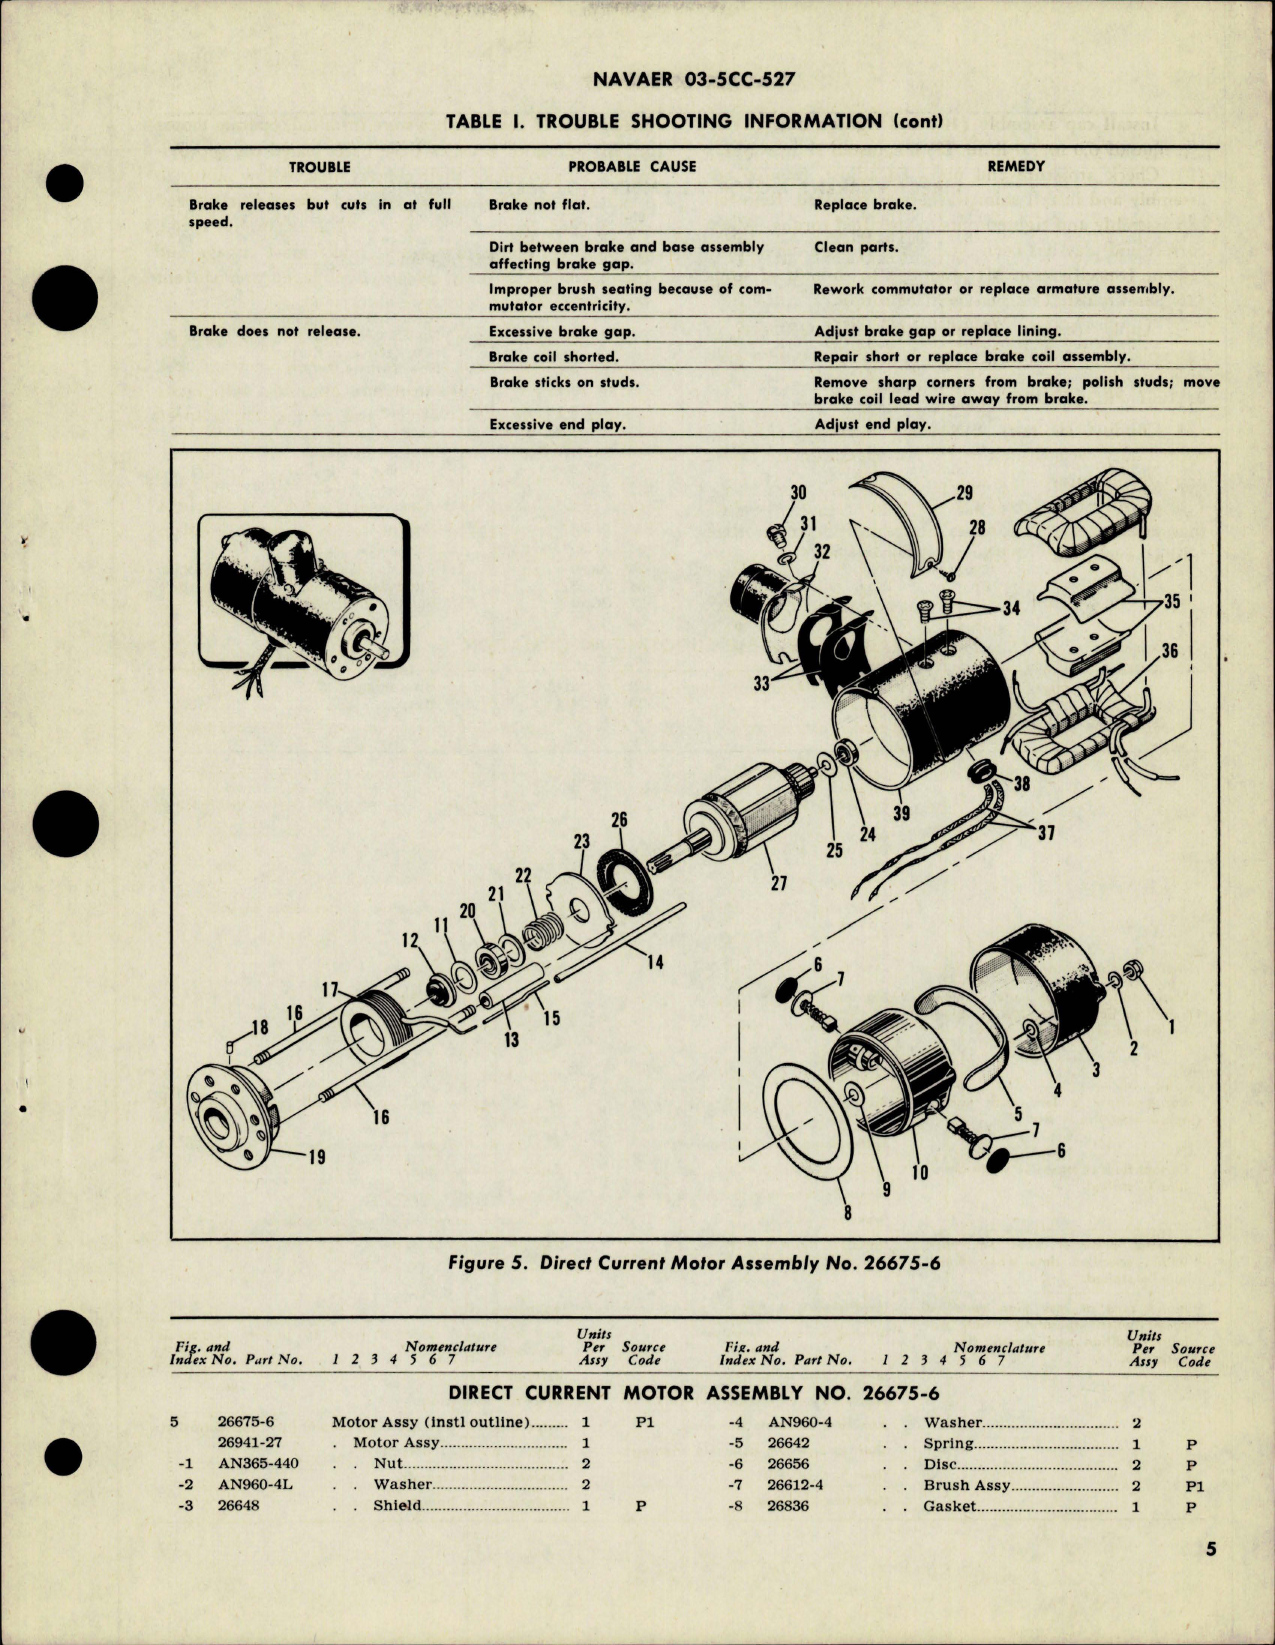 Sample page 5 from AirCorps Library document: Overhaul Instructions with Parts for Direct Current Motor Assembly - 26675-6 